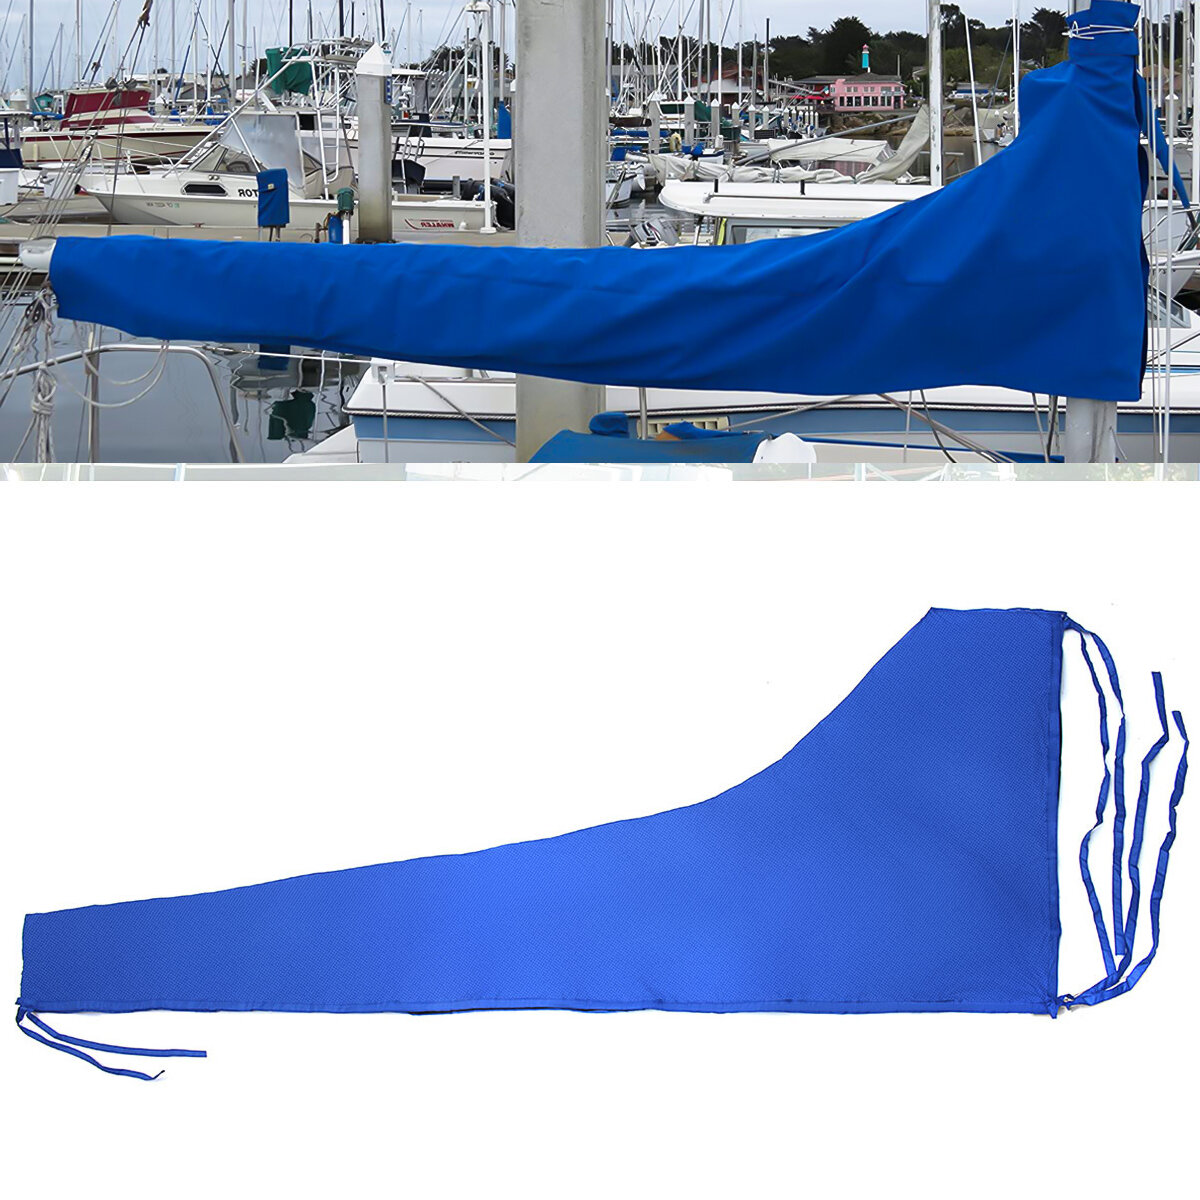 10-11ft 3.5m 420d sail cover mainsail maine boom cover waterproof fabric blue